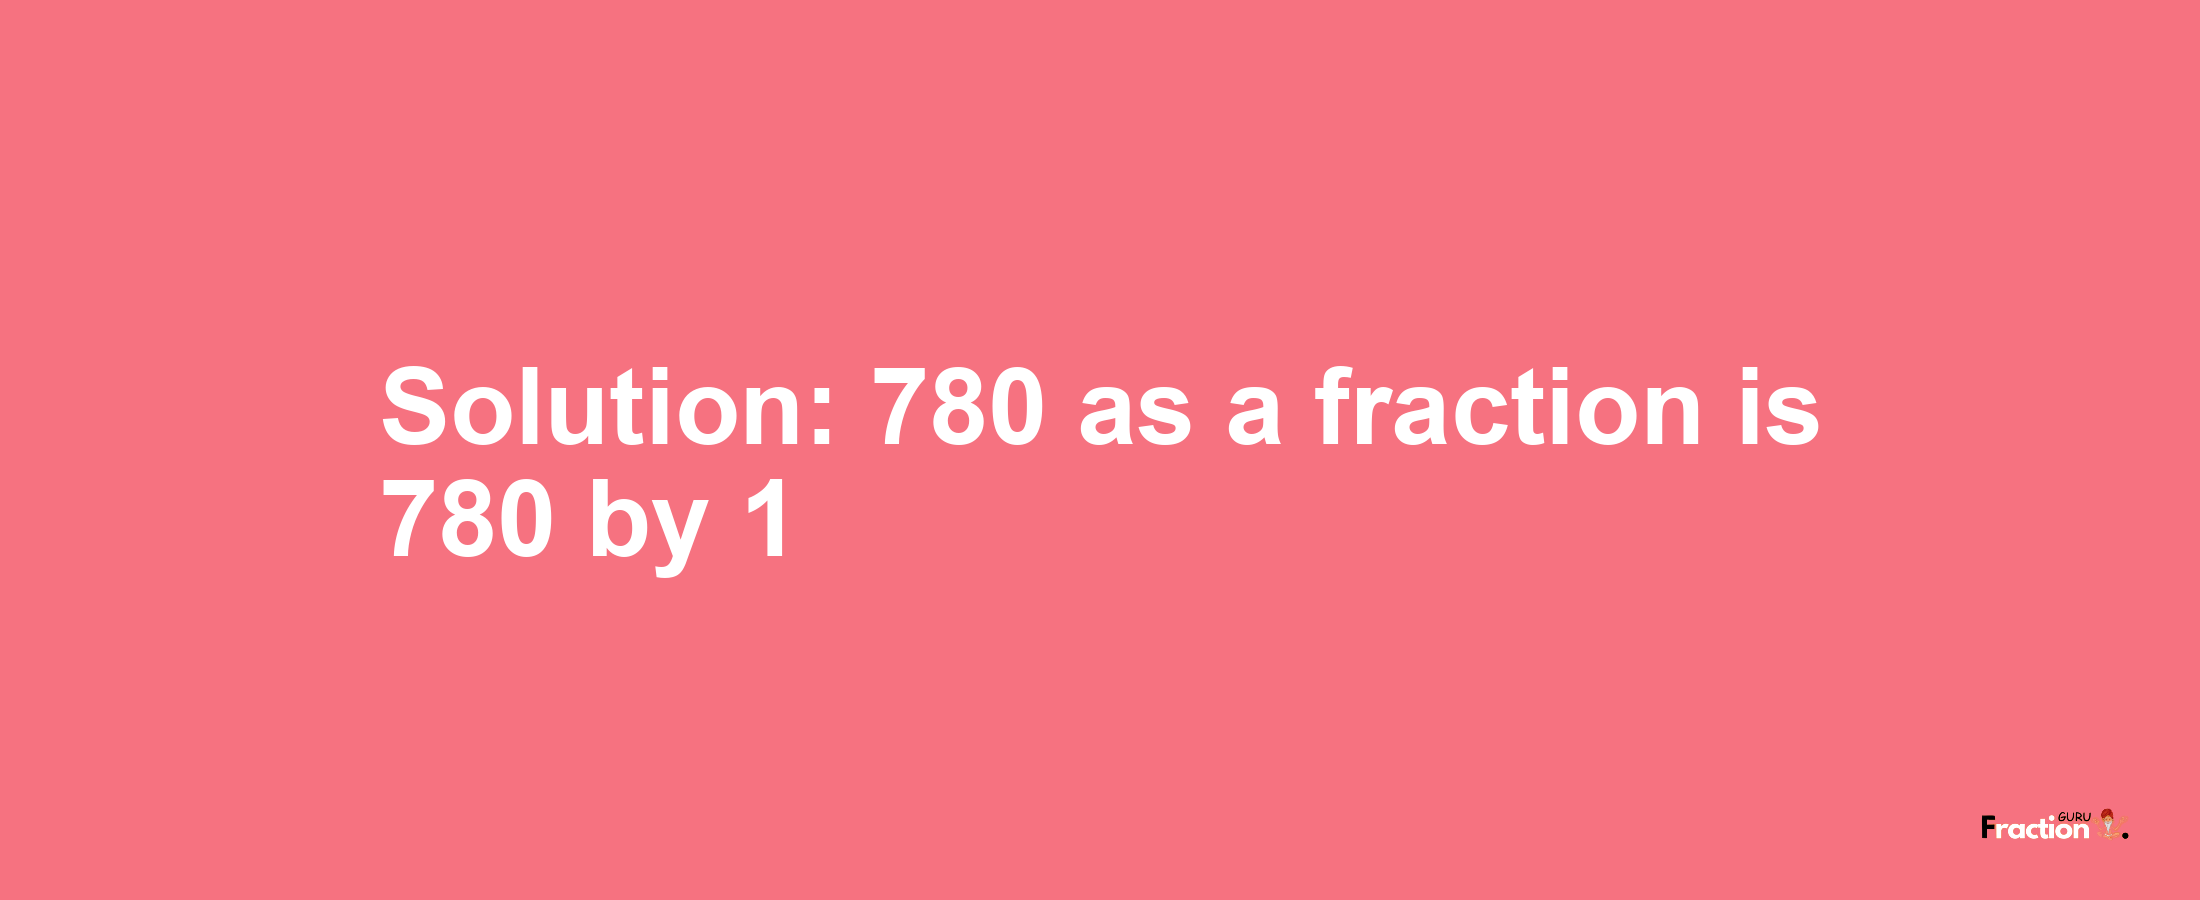 Solution:780 as a fraction is 780/1